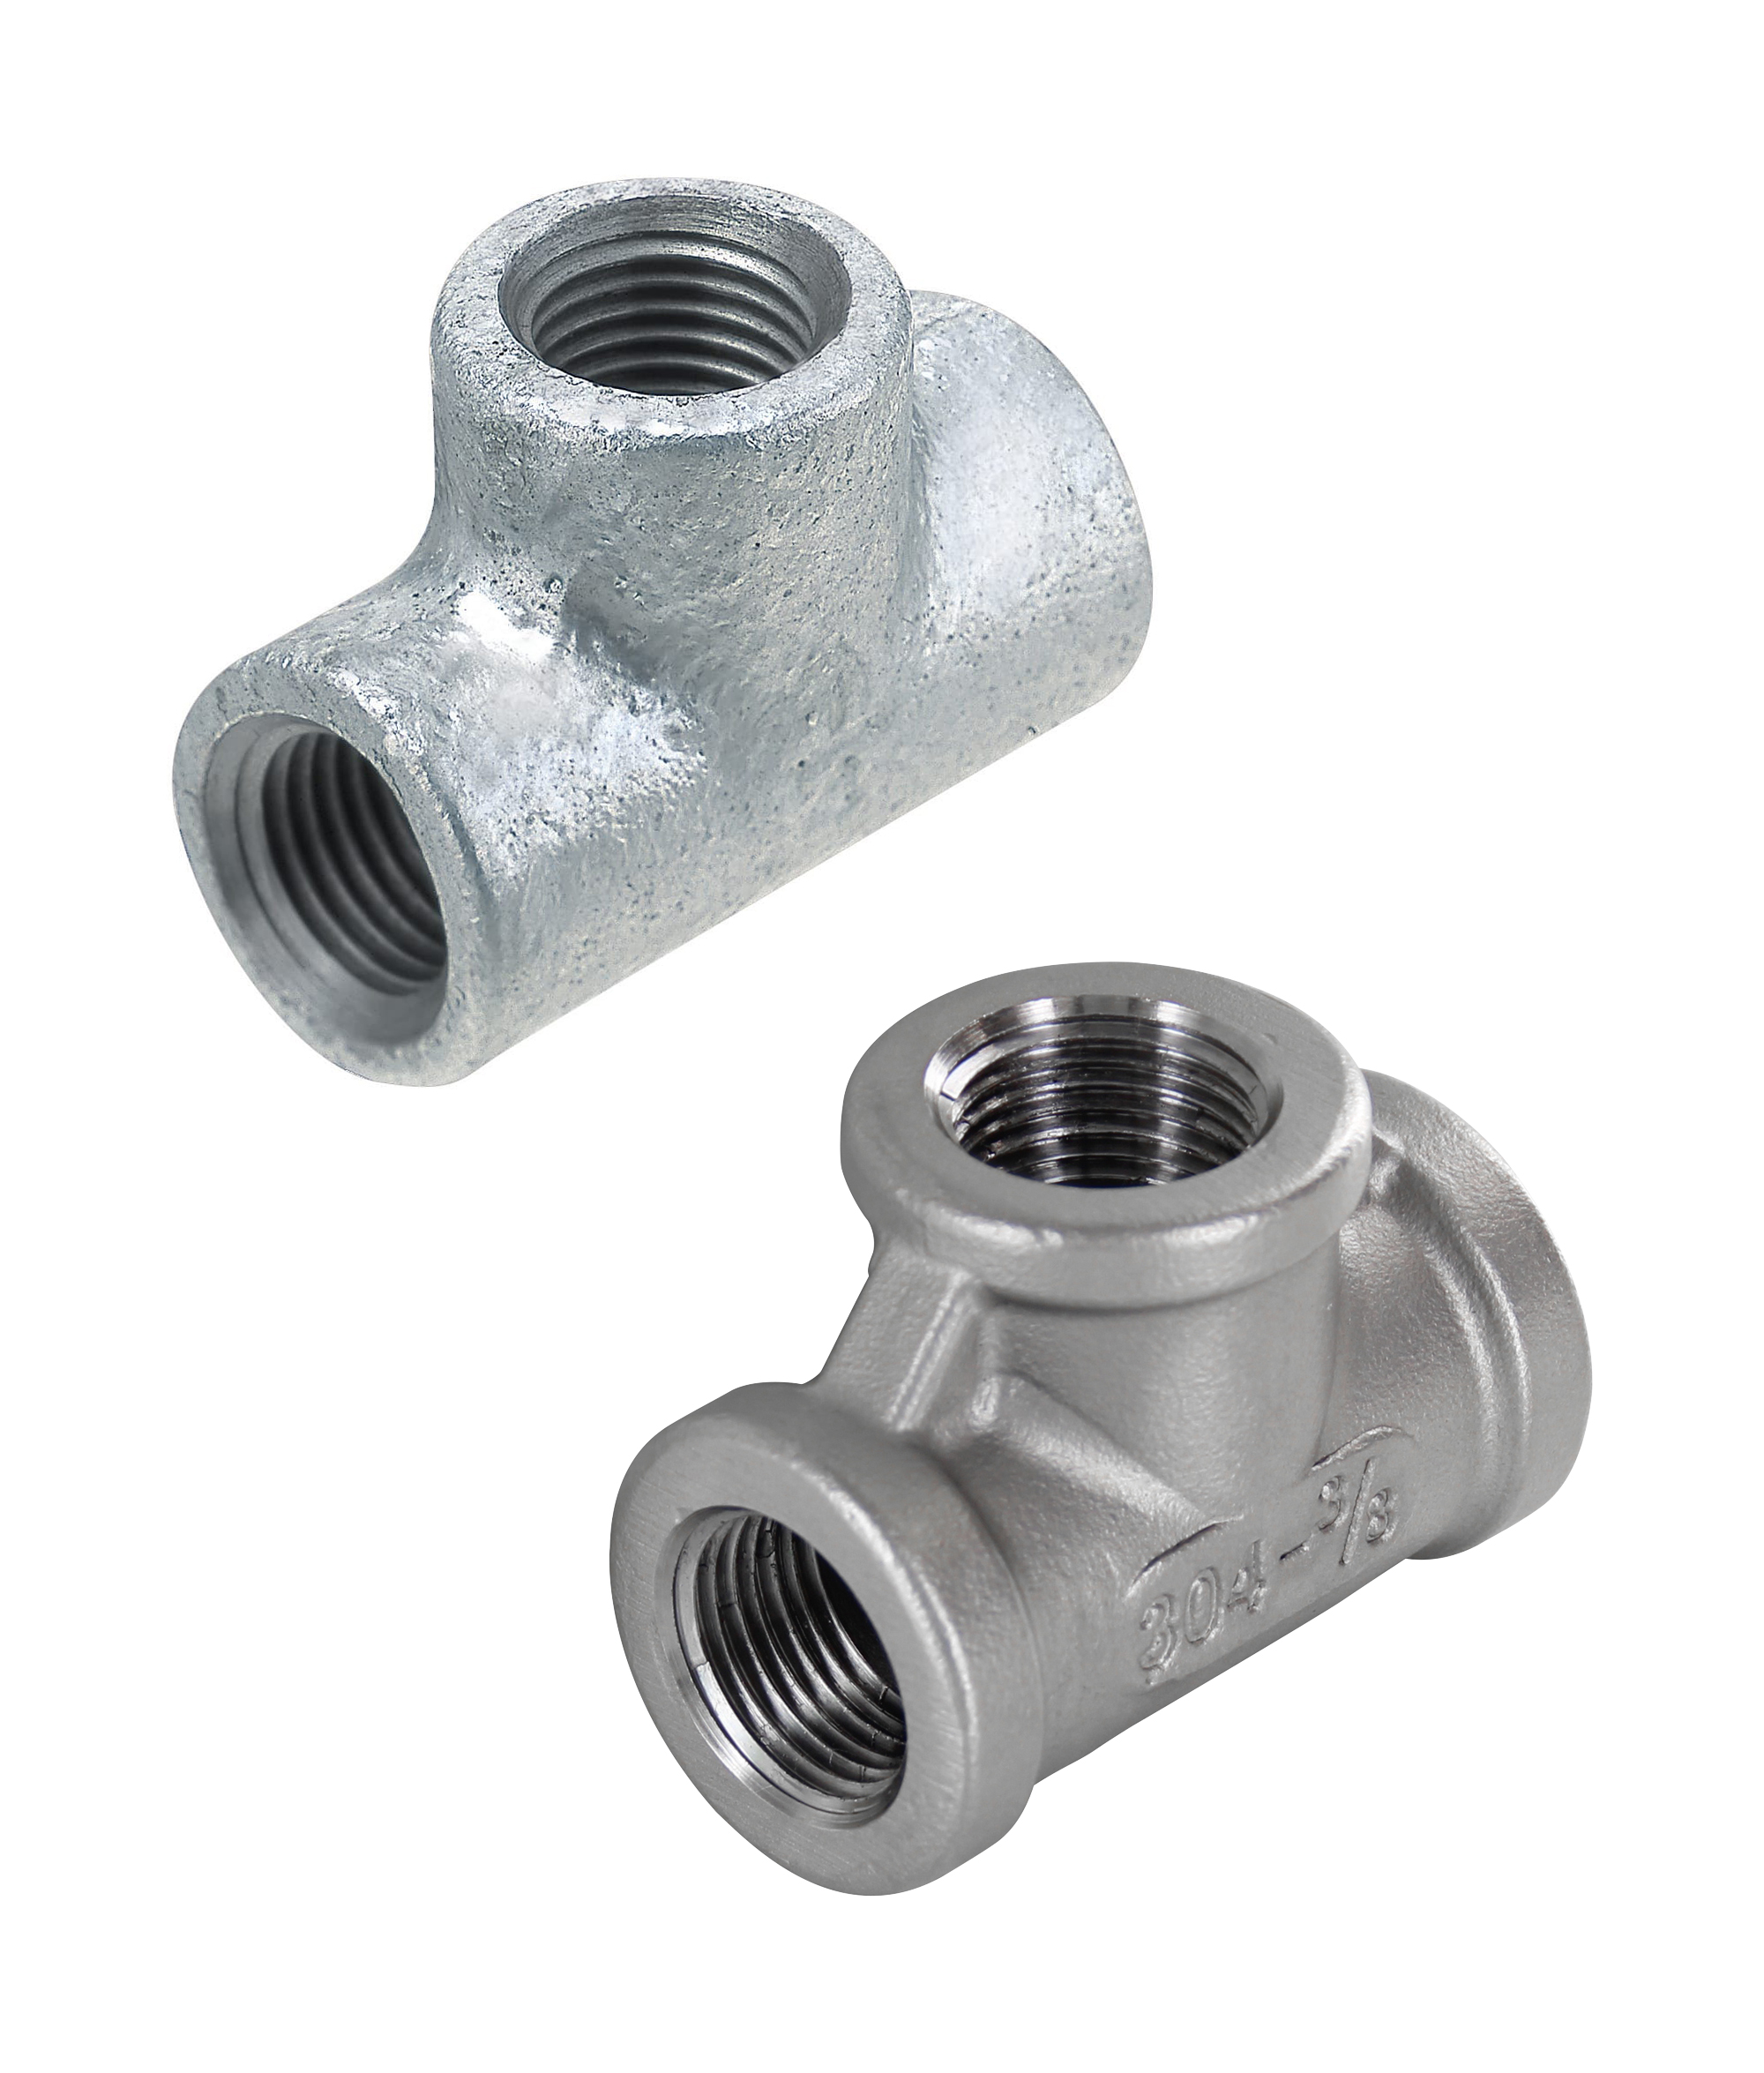 Low Pressure Fittings / Tee SGPPT8A